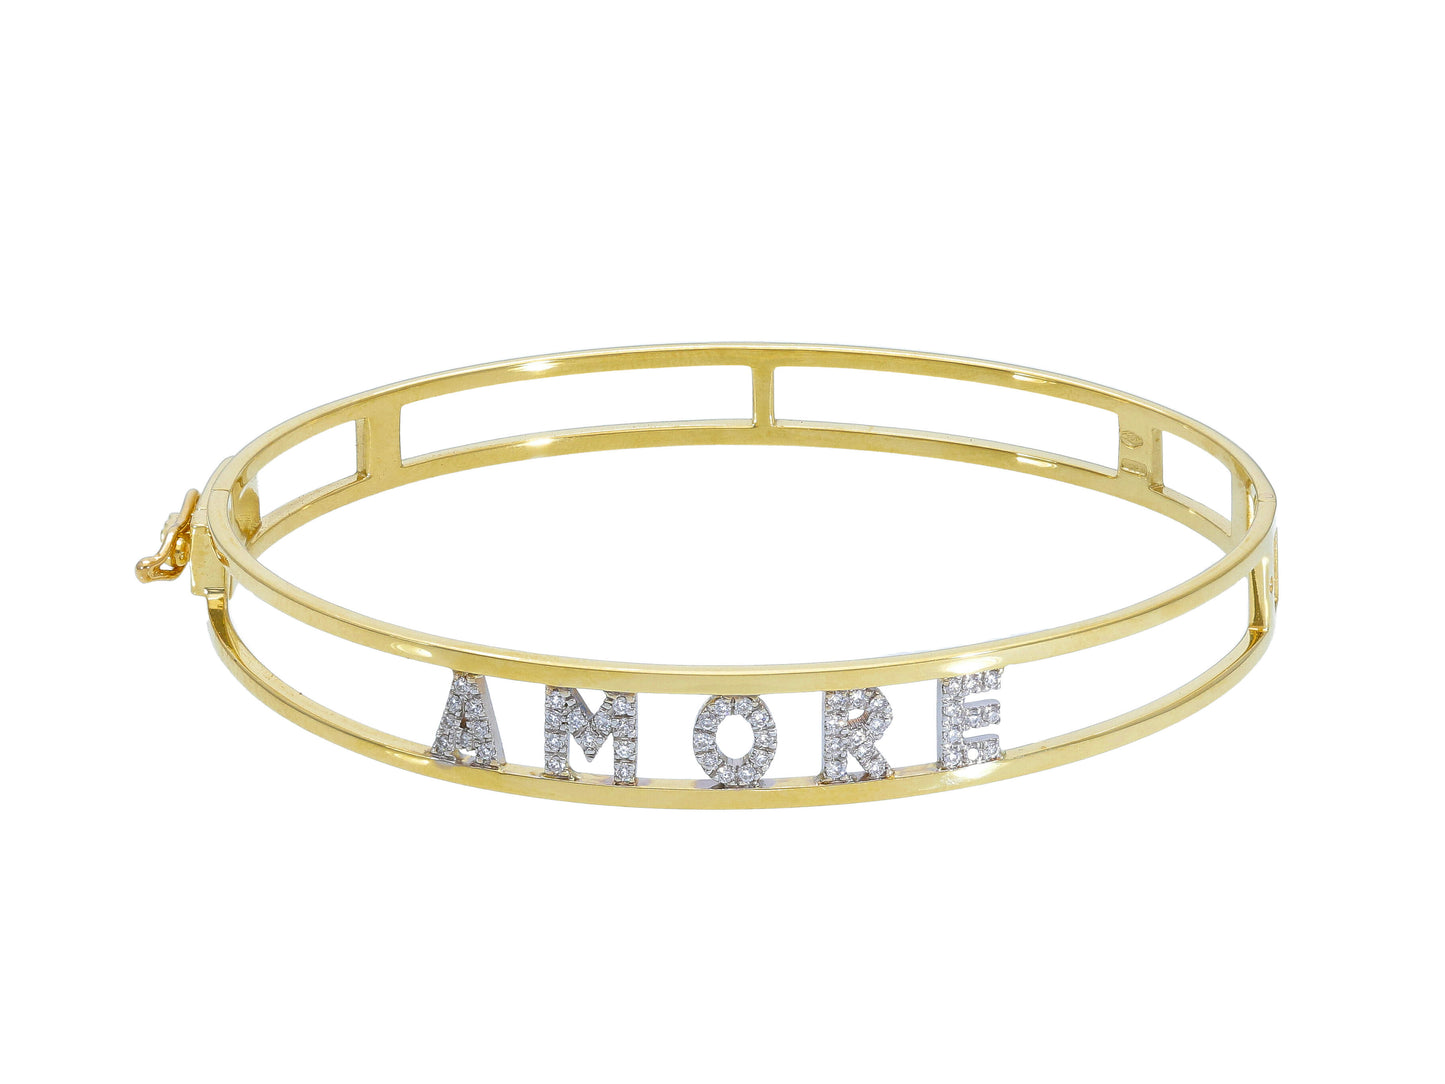 Rigid yellow gold and diamond bracelet - customizable from 5 to 9 letters